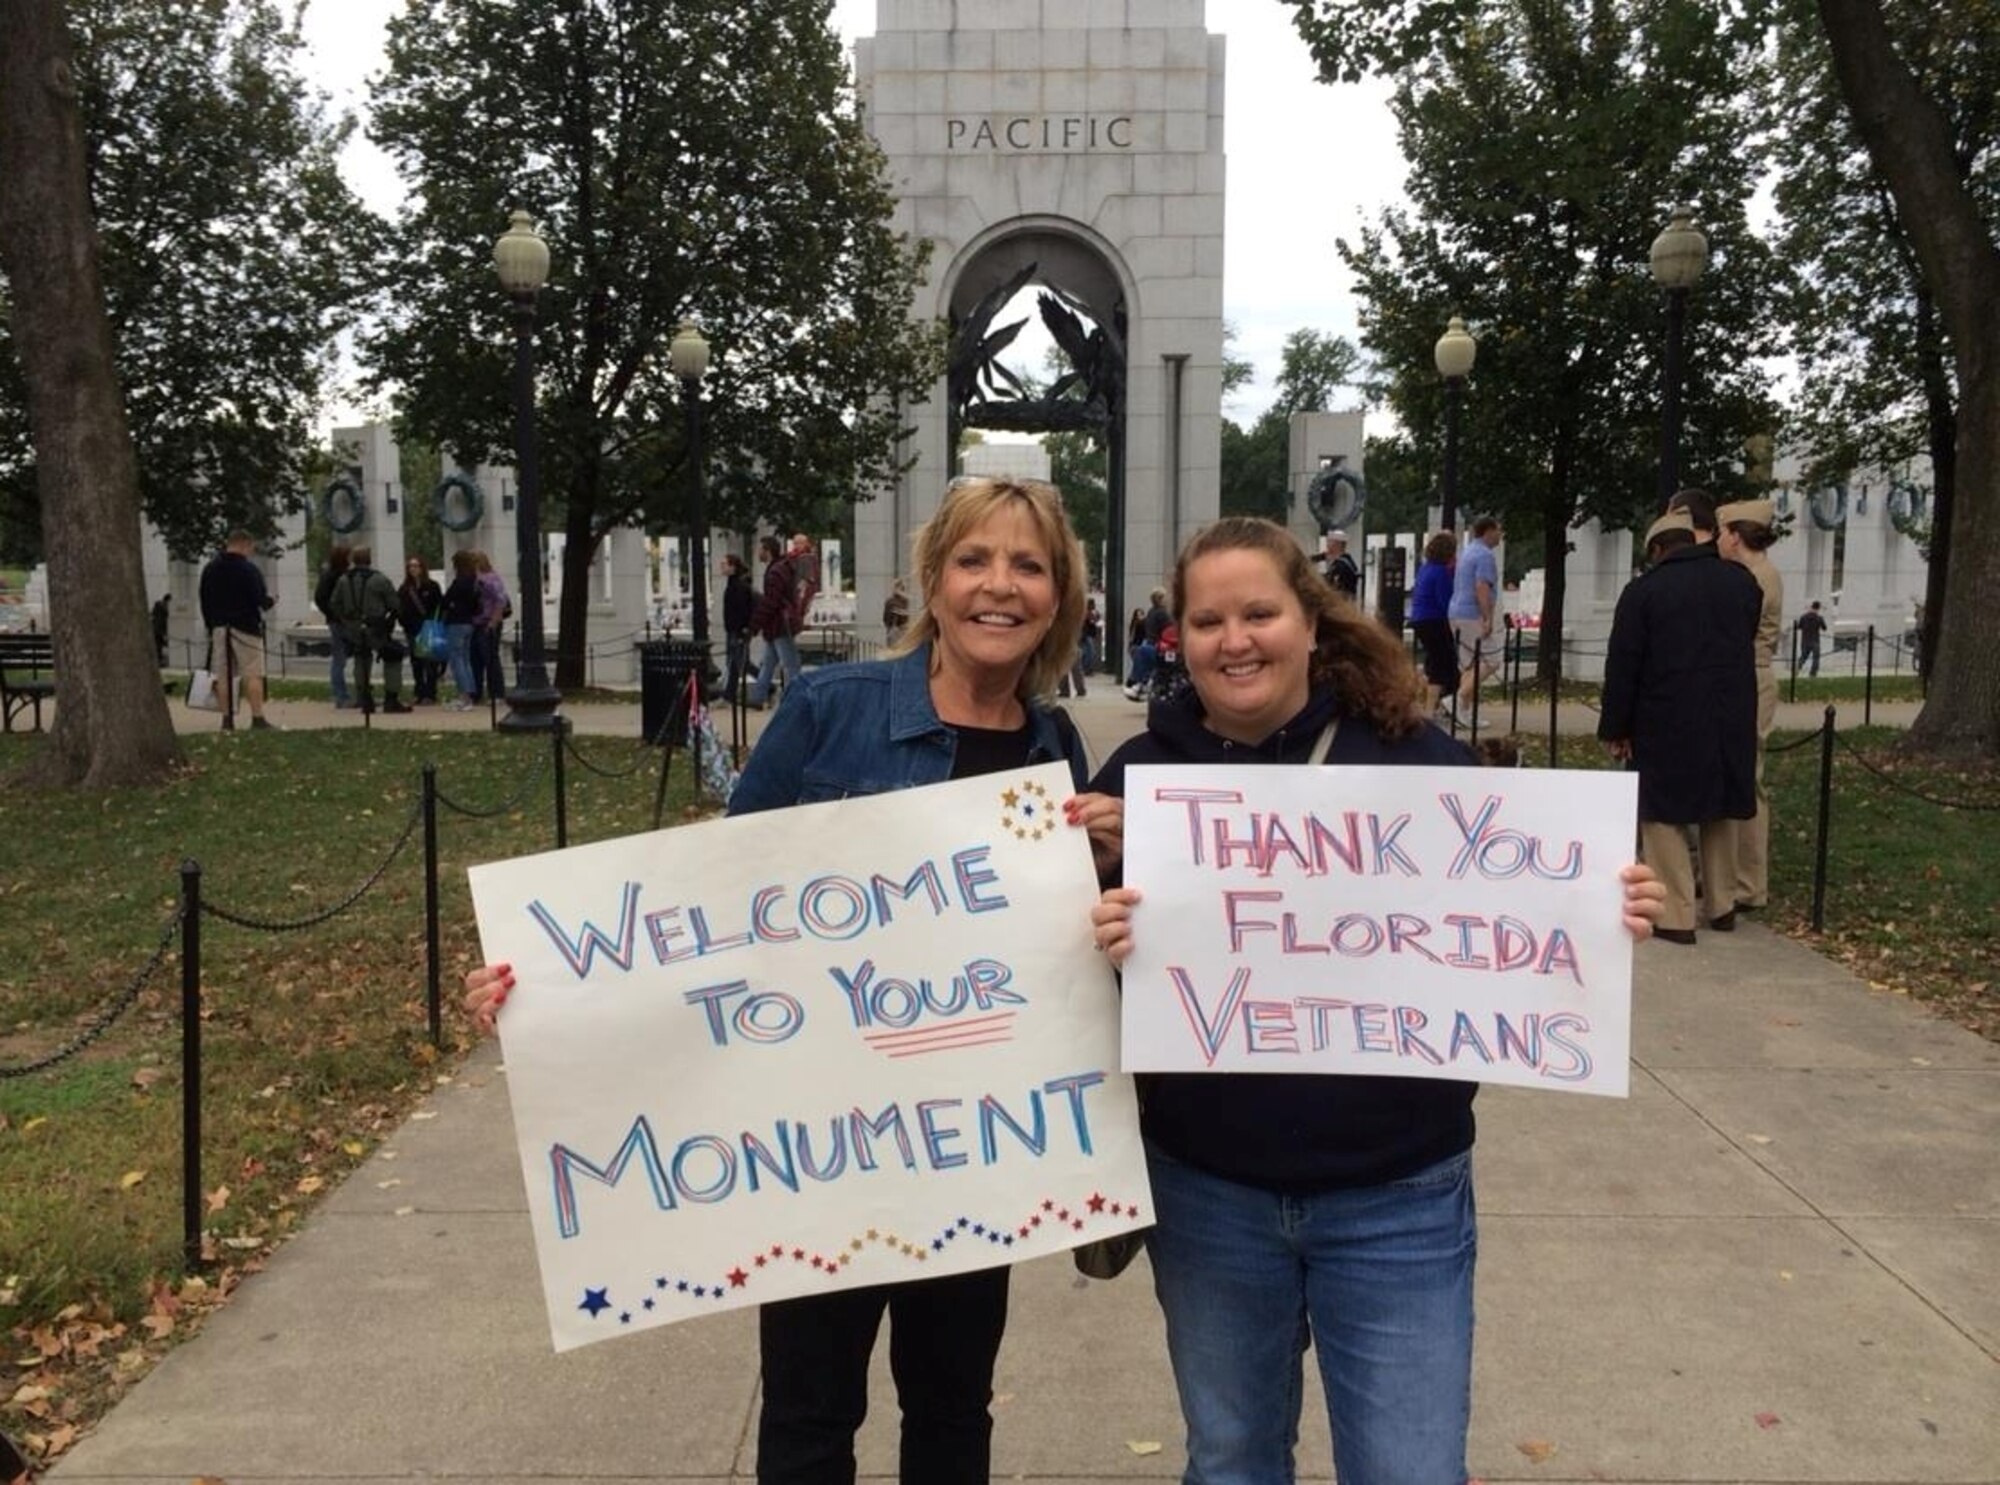 (Left) Debbie Gasaway, and Heidi Hunt, 45th Space Wing Public Affairs specialist, greet veterans at the World War II Memorial, Washington, D.C., in conjunction with members of Andrews Air Force Base, Md., Oct. 19, 2013. Military and civilian volunteers from the local area attend each ceremony in support of the Honor Flight Program. (Courtesy photo)